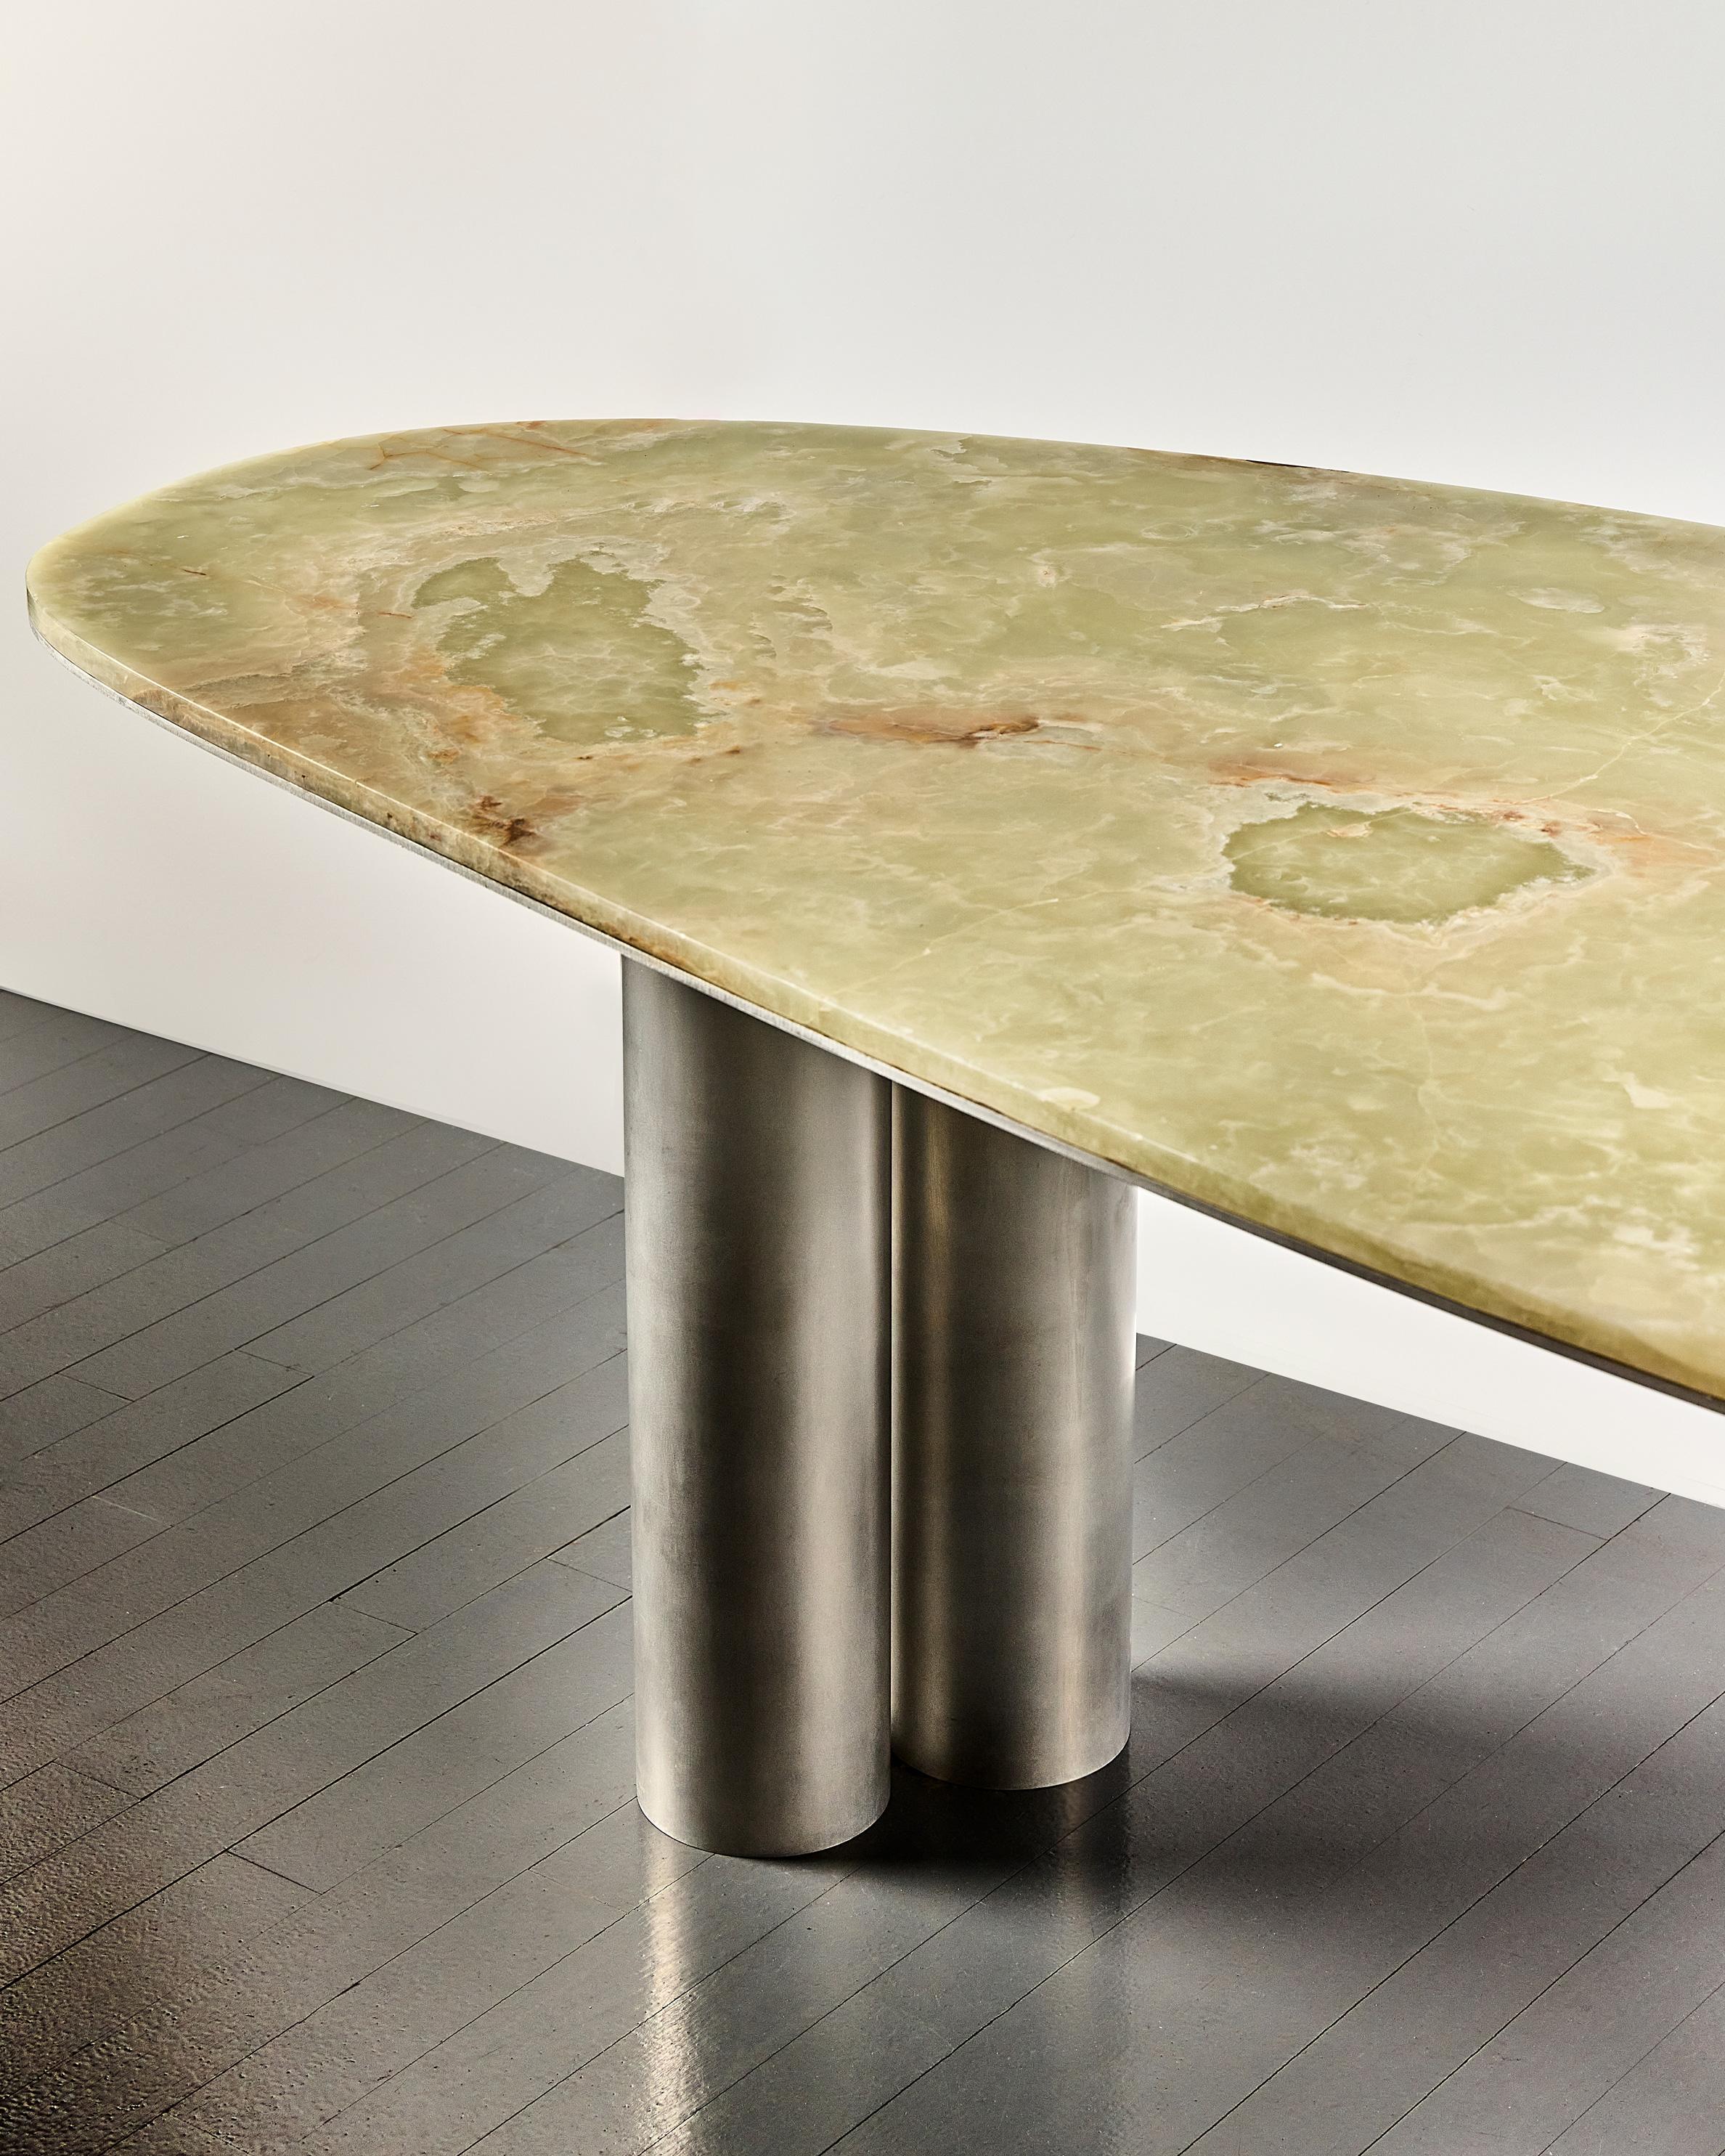 Celebrating nature's inherent beauty, the Oni Desk embraces the irregular shape of a found Green Onyx slab. This desk's innovative design is informed by the unique constraints of the stone, resulting in a mesmerizing and one-of-a-kind form. The